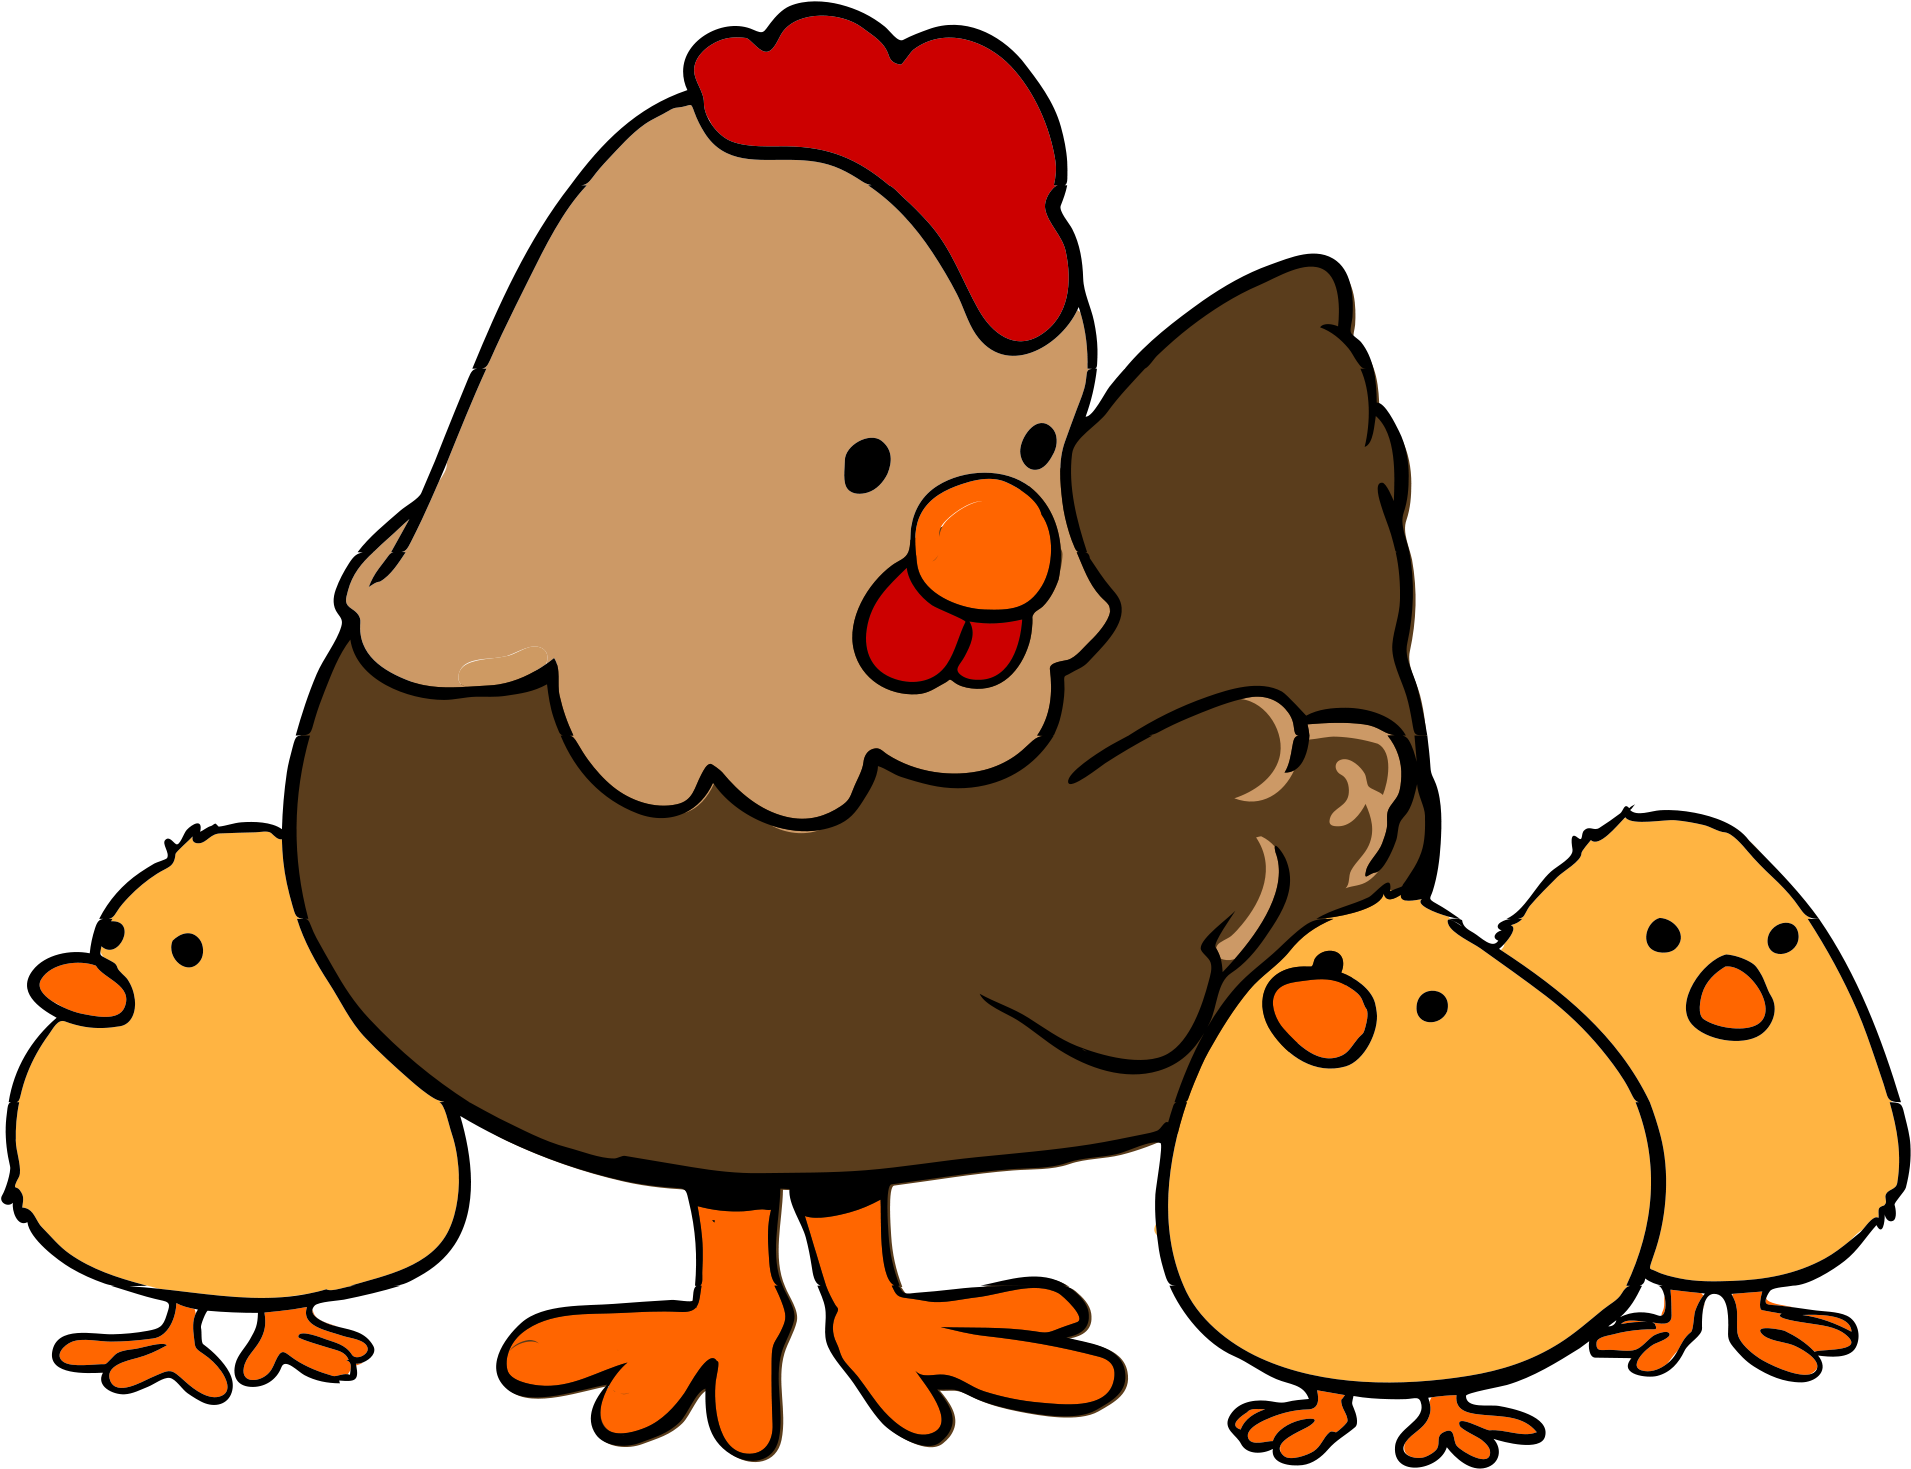 Mother Hen With Chicks Illustration PNG